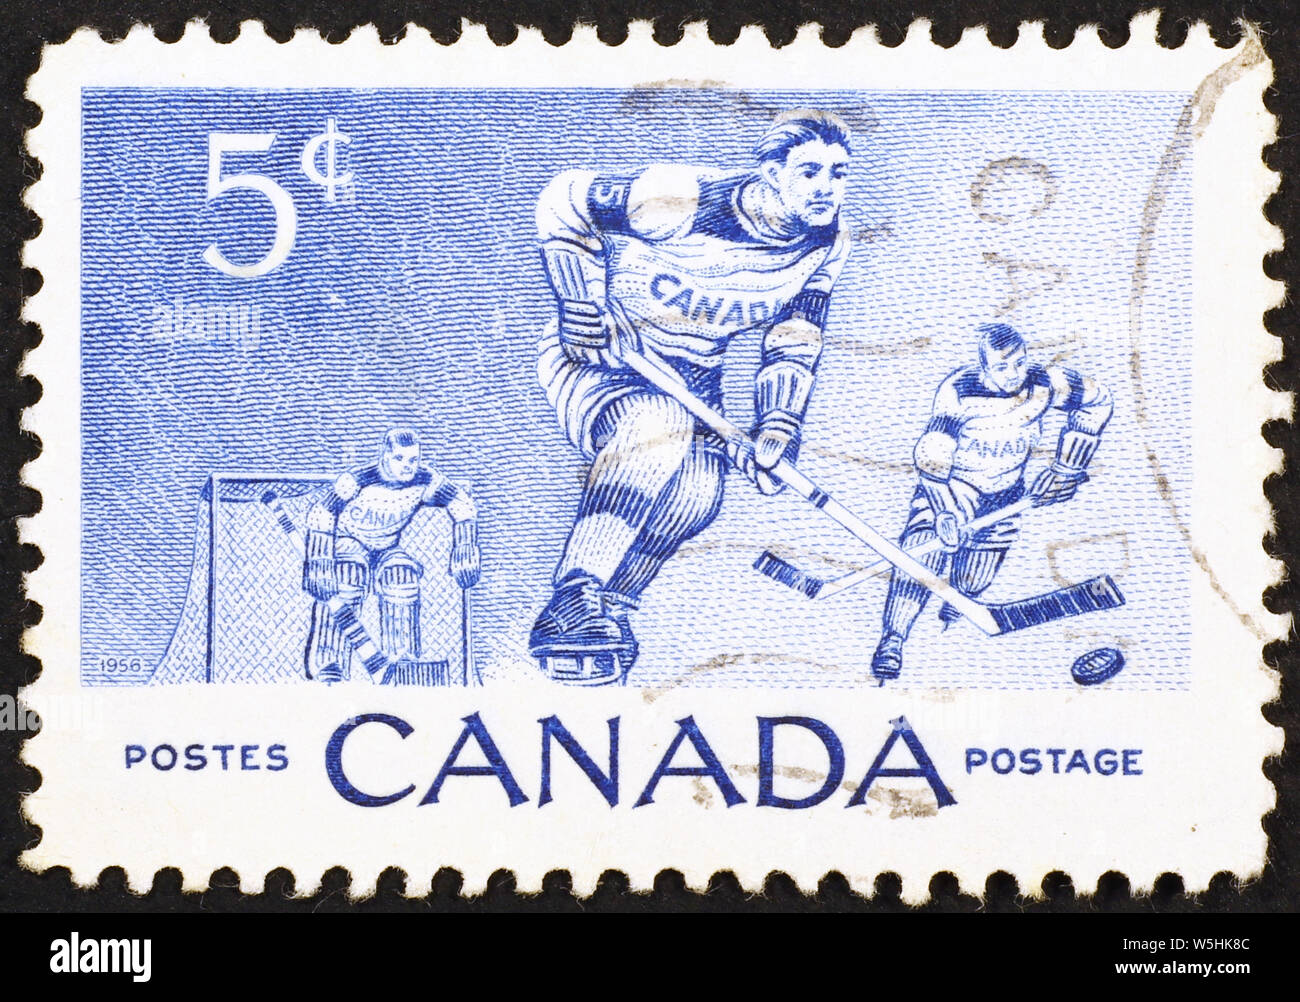 Ice hockey players on vintage canadian postage stamp Stock Photo